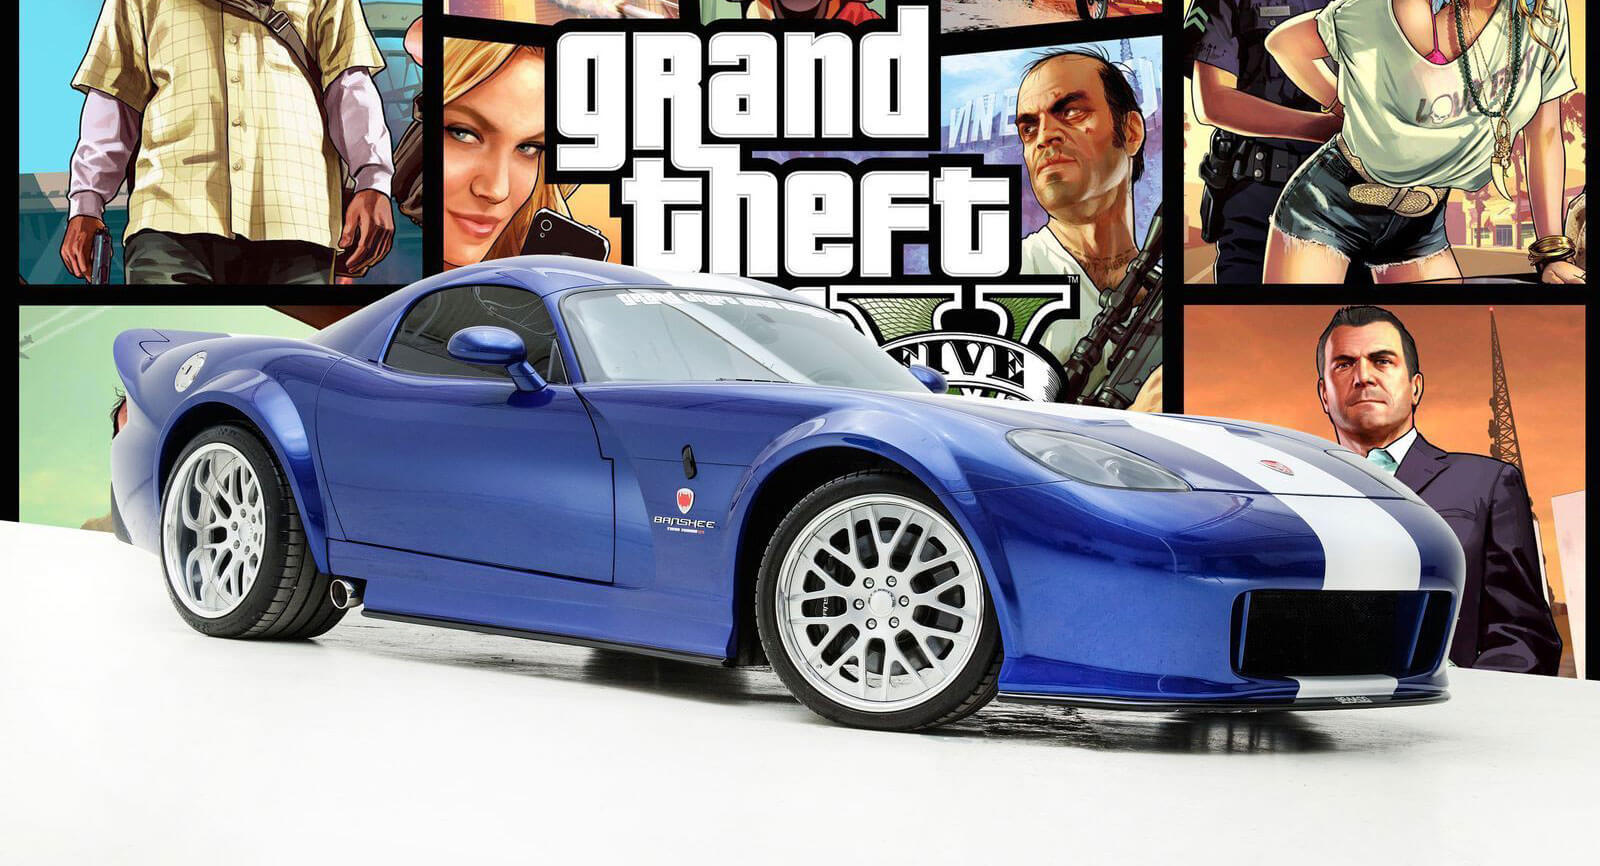 Grand Theft Auto' Banshee sports car now exists in real life